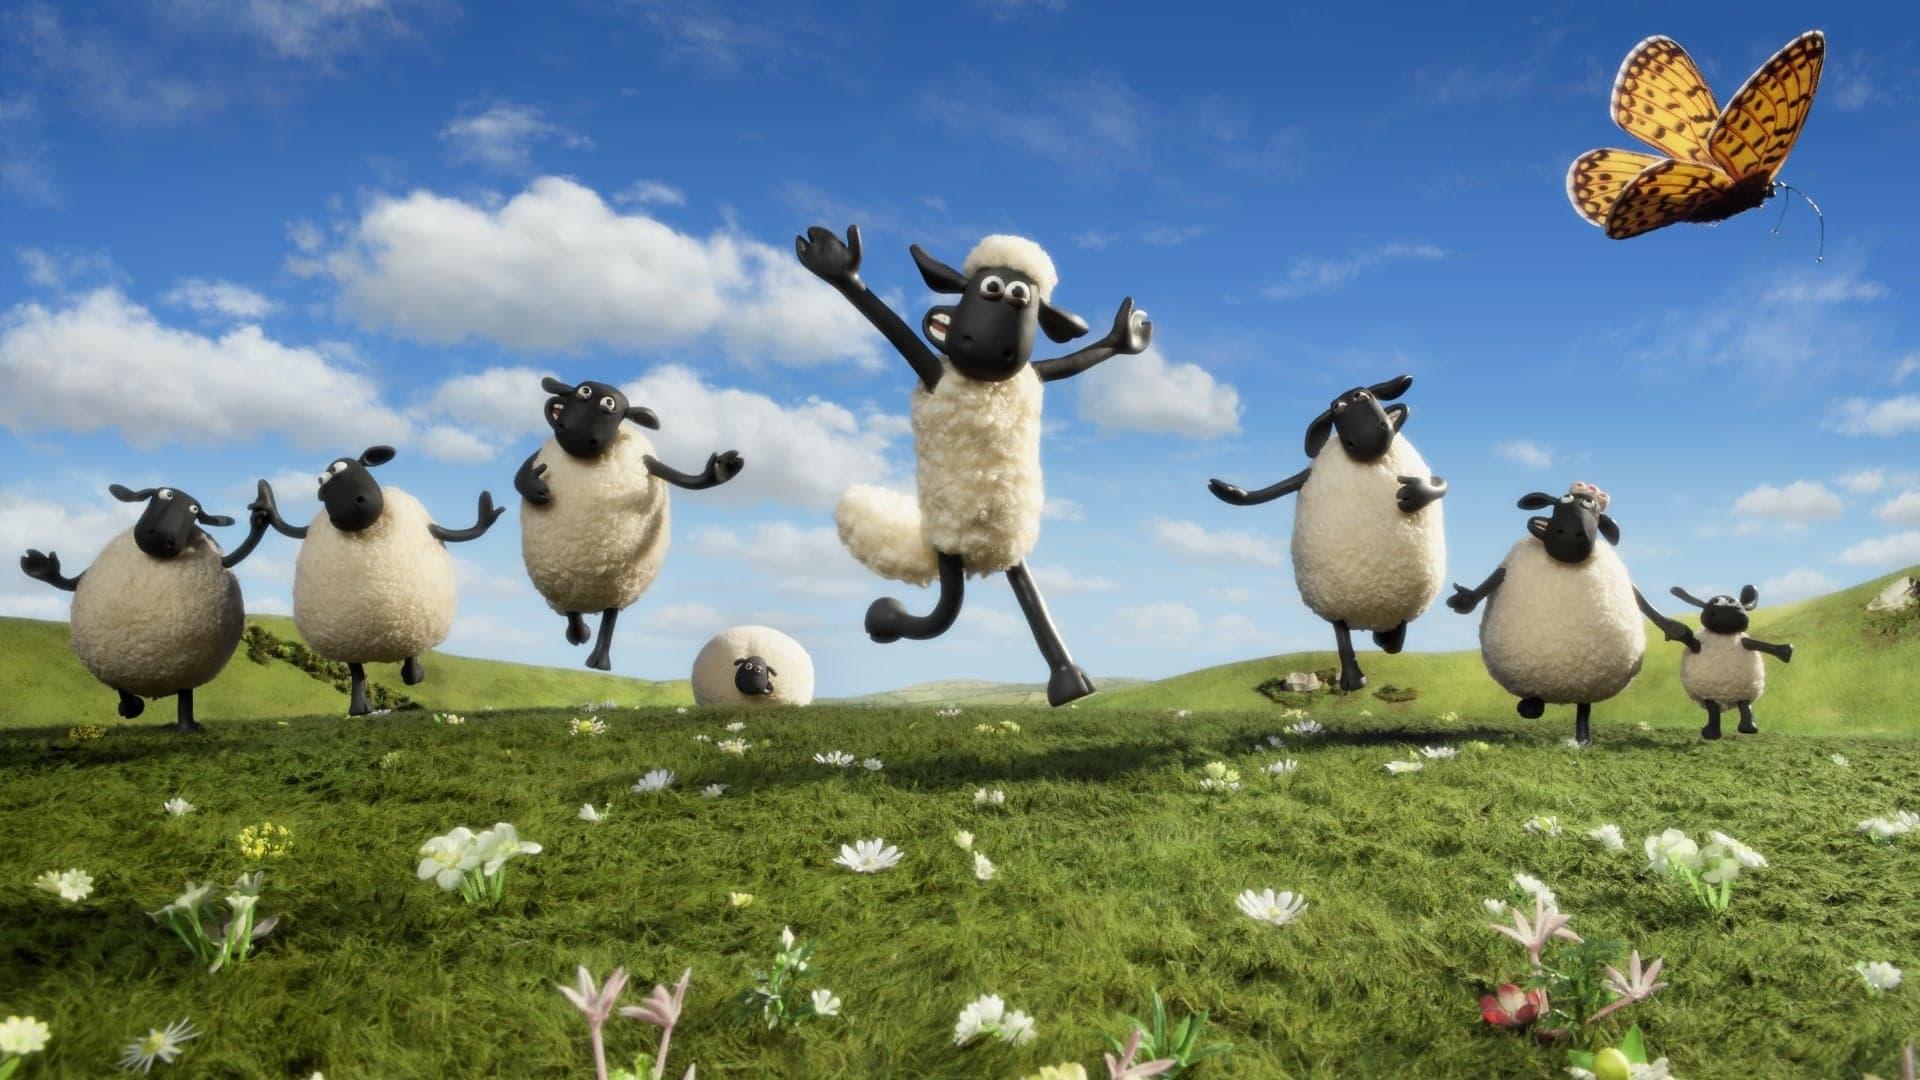 Shaun the Sheep: One Giant Leap for Lambkind backdrop